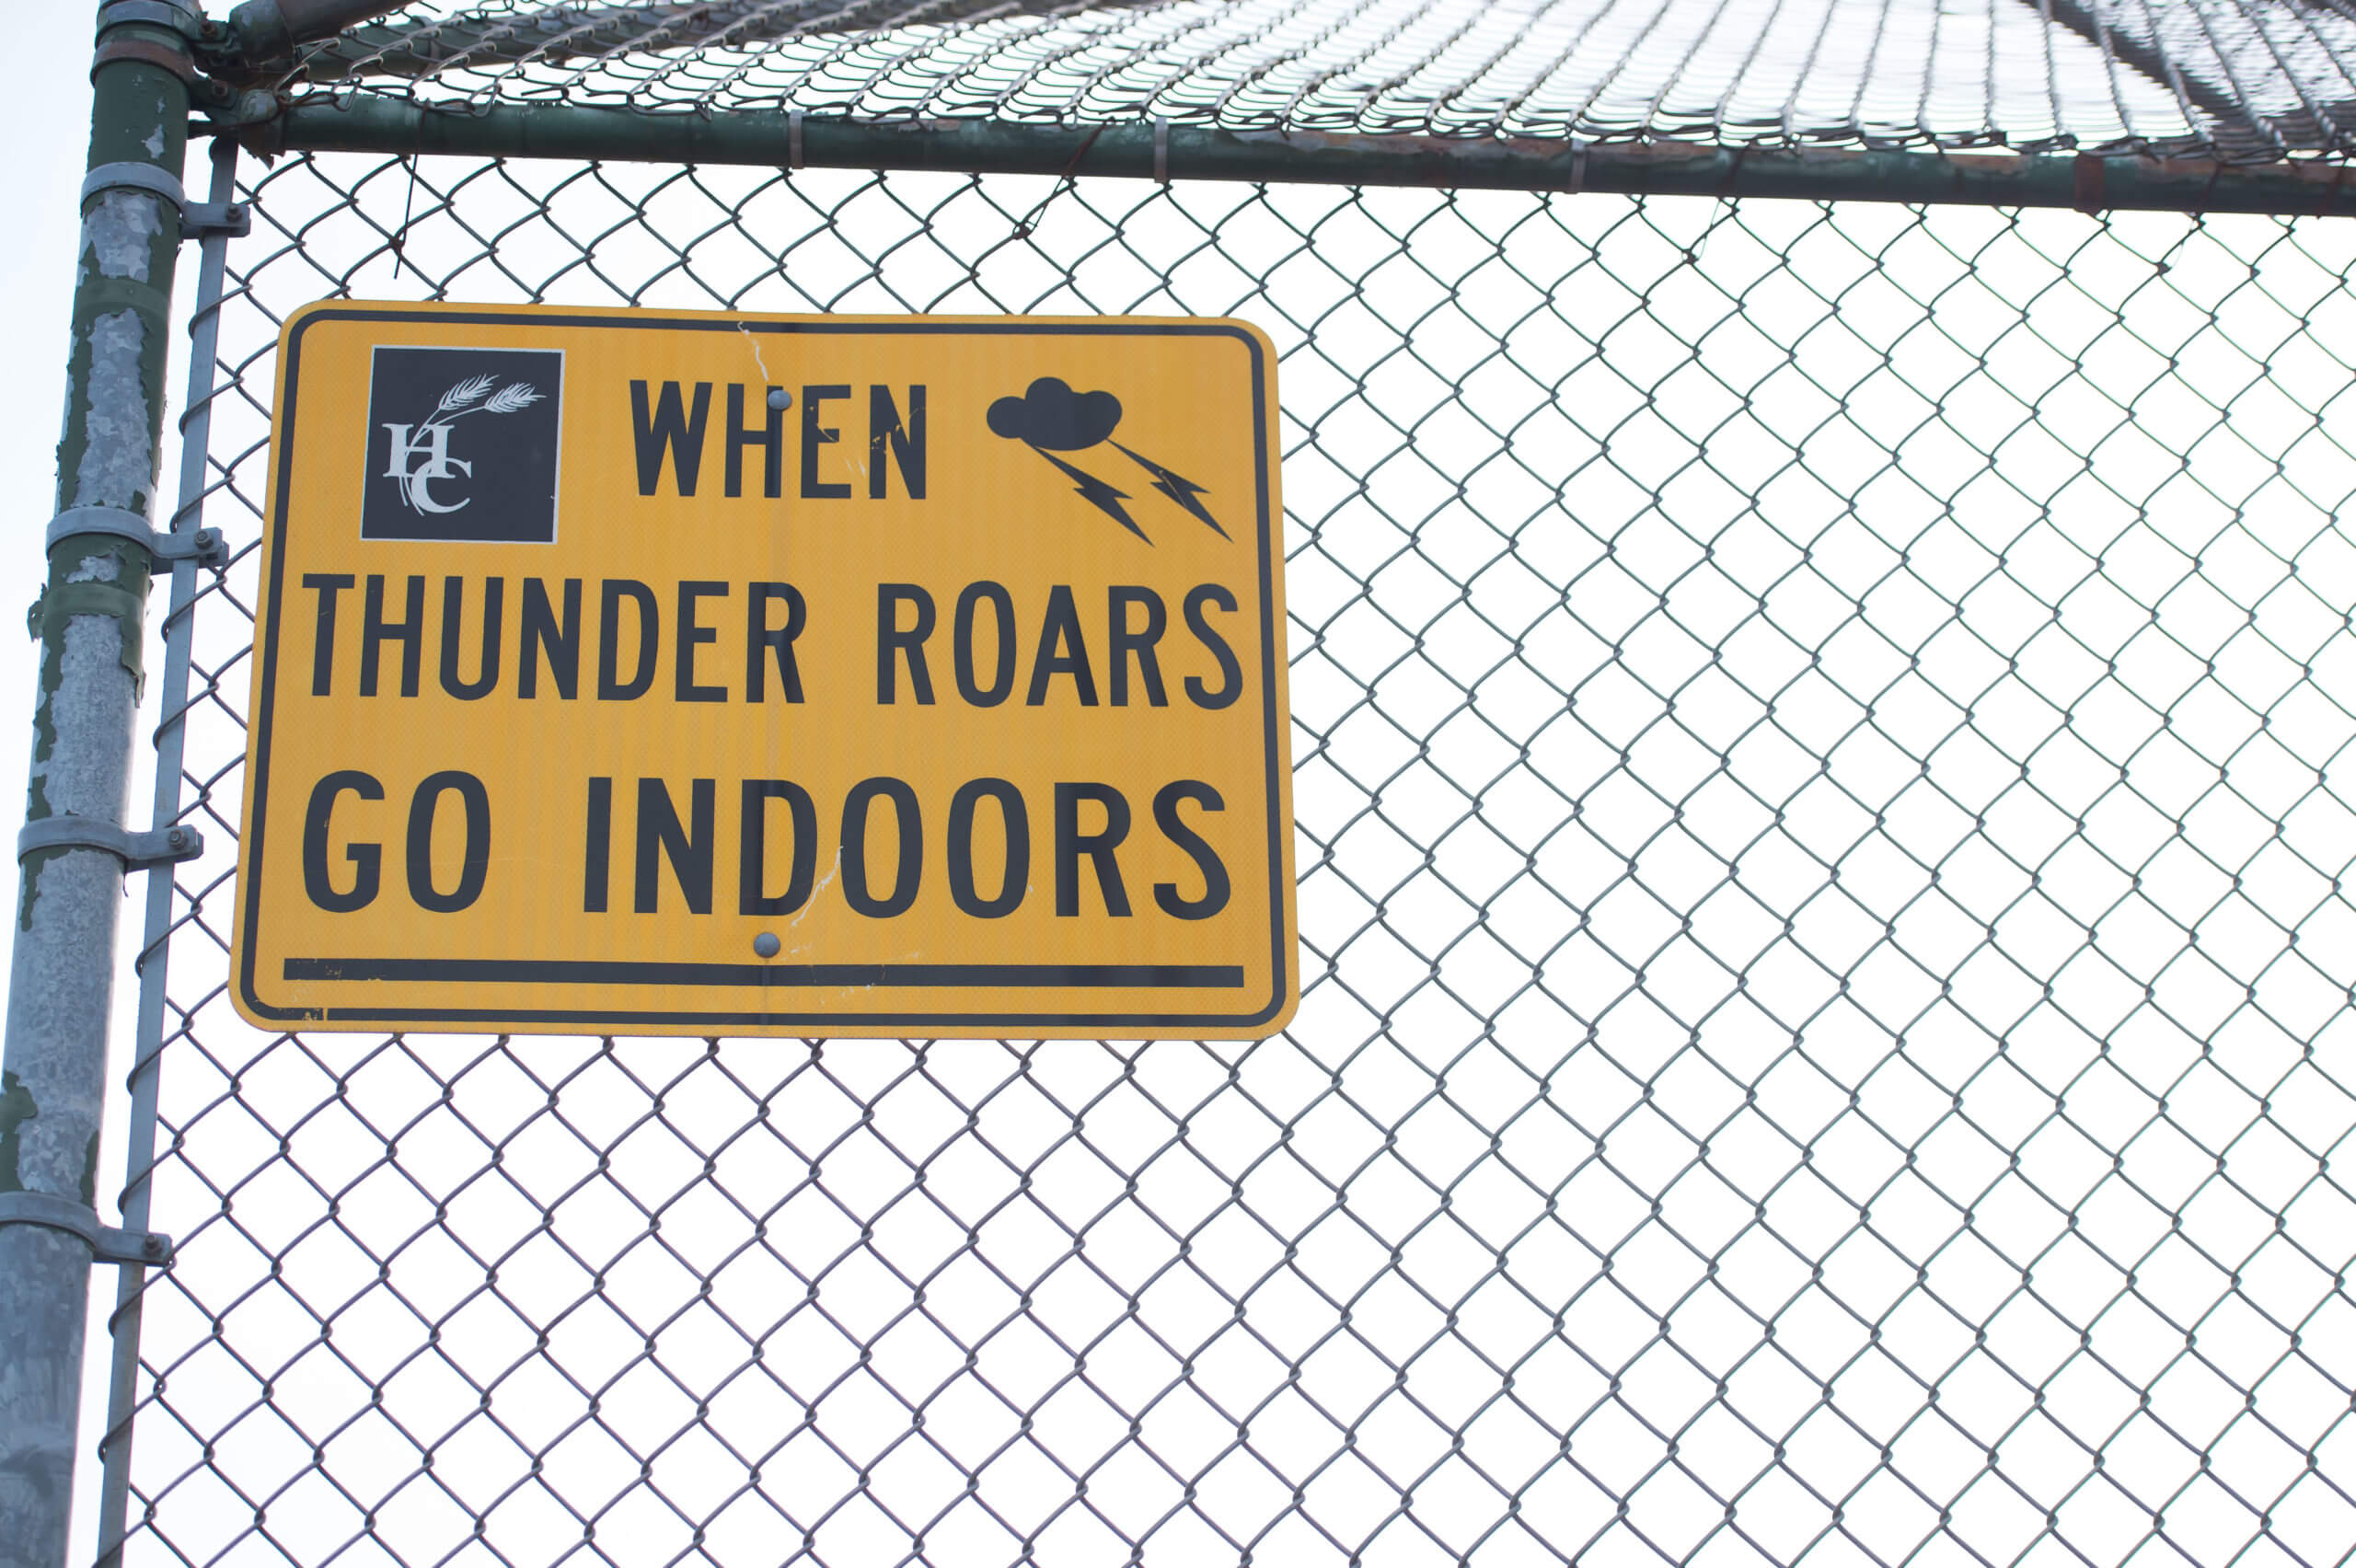 A sign attached to a metal fence reads, "When thunder roars go indoors." The word indoors is underlined and there is an outline of a cloud and lightning bolts.